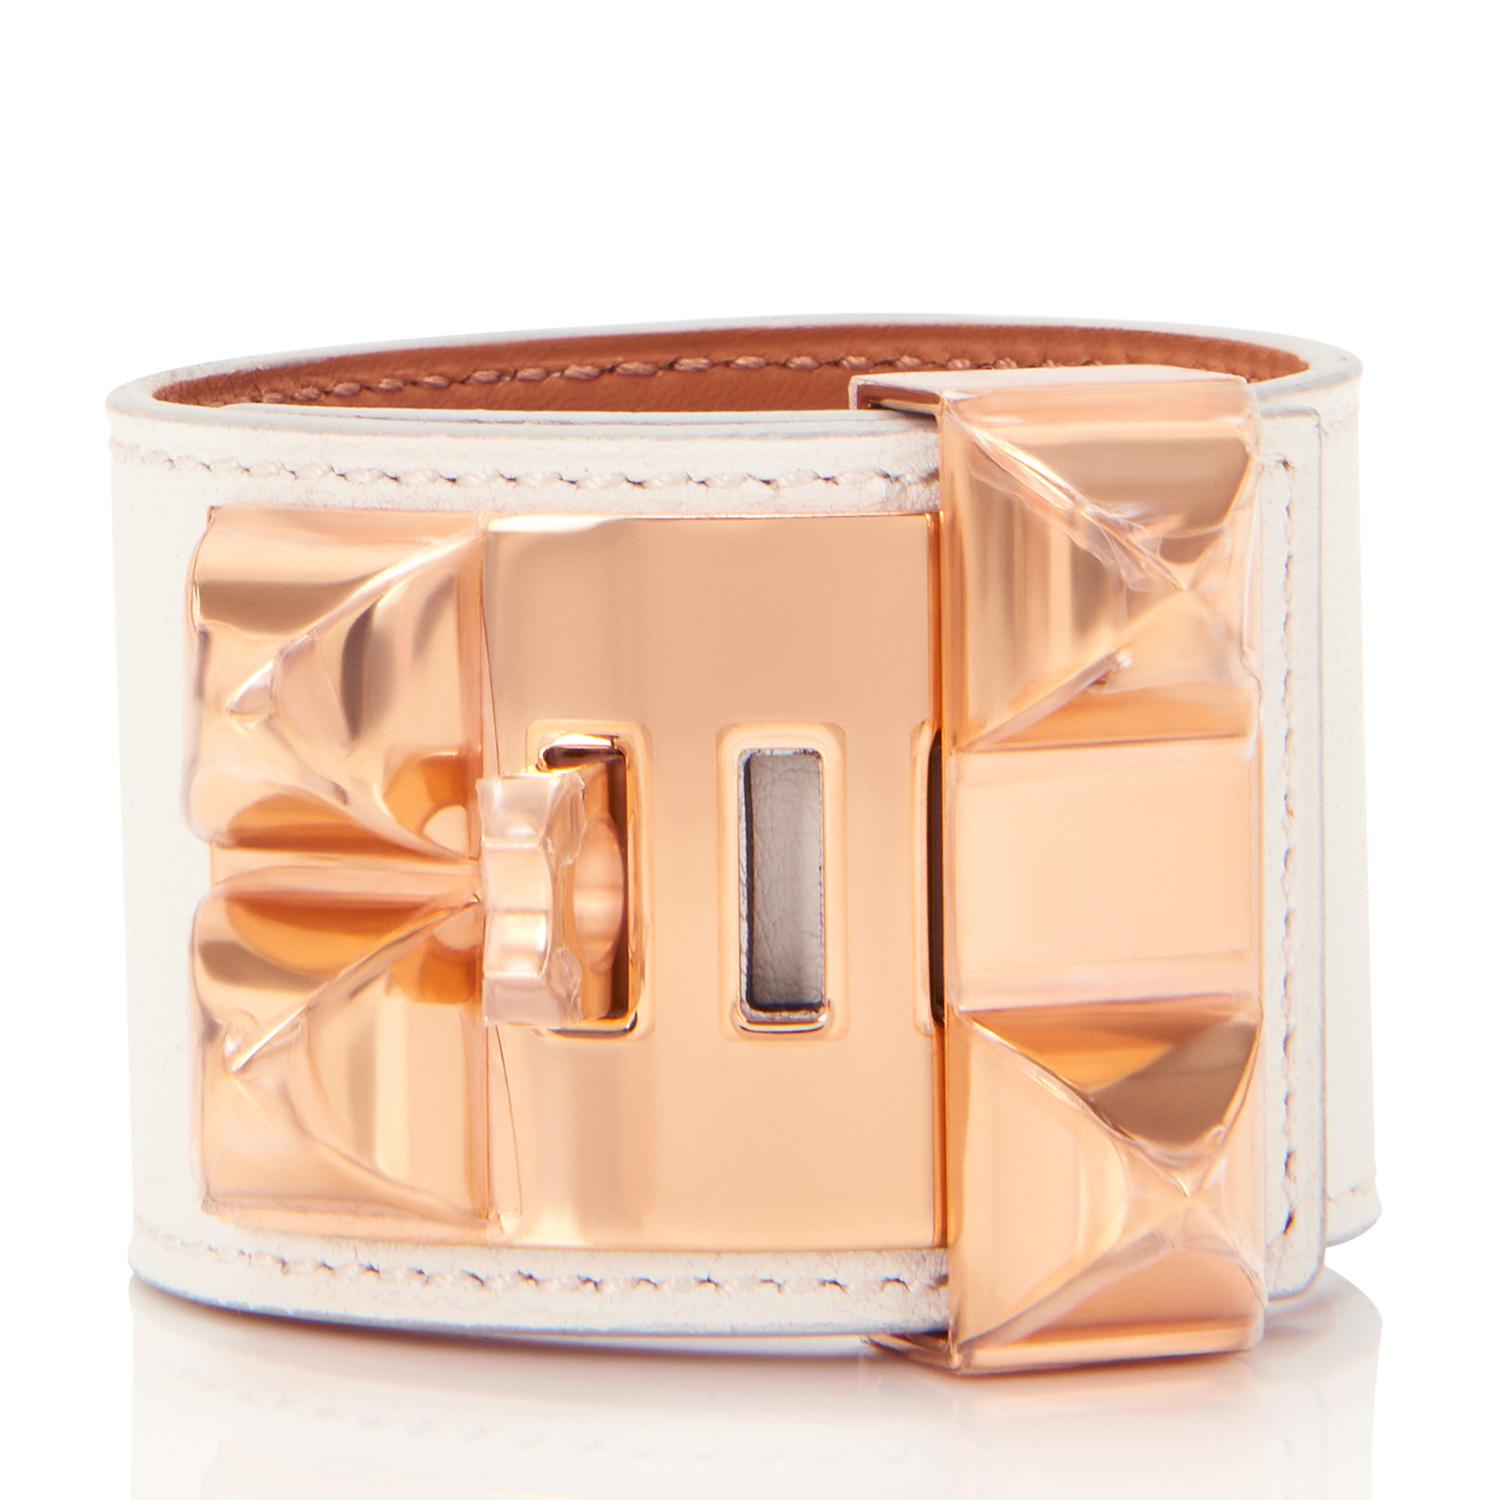 Hermes White Collier de Chien CDC Cuff Bracelet in Swift Leather with Rose Gold Hardware 
Sublime!  The ultimate bracelet from Hermes in the rarest White color!
White CDC with Rose Gold is extremely rare as it is rarely ever produced.
Brand new in